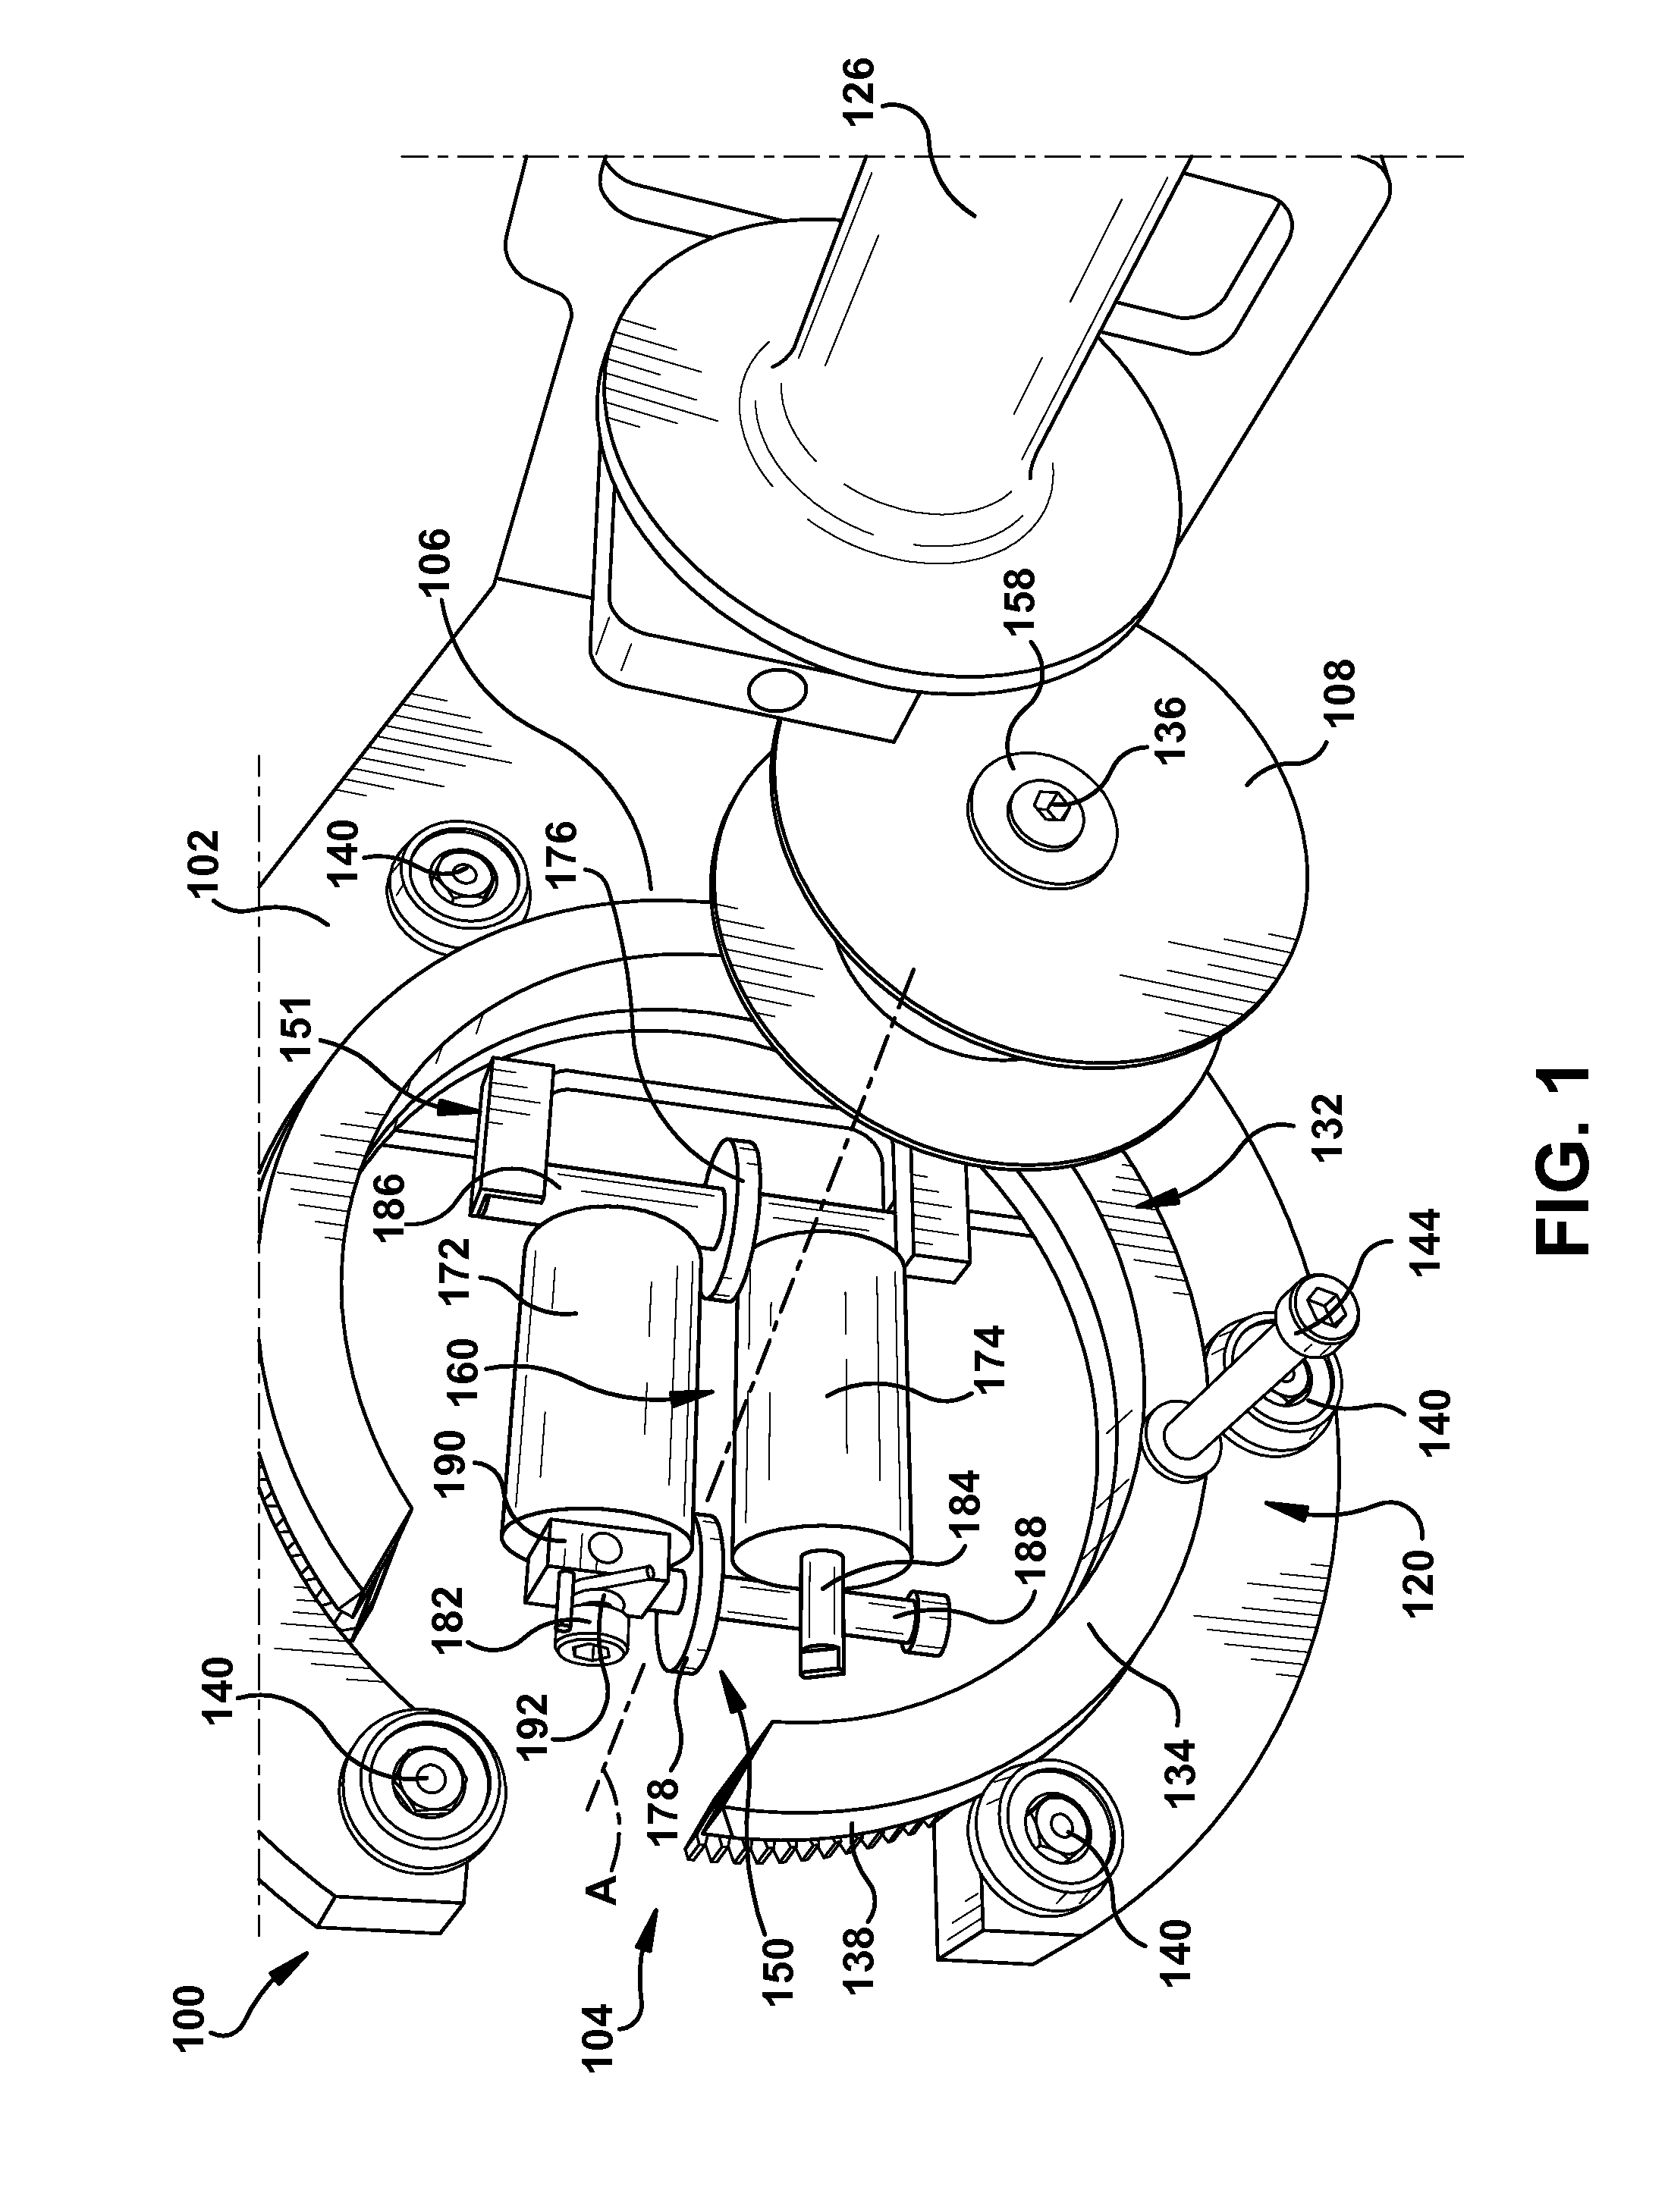 Hand-carried taping machine with non-powered guide system